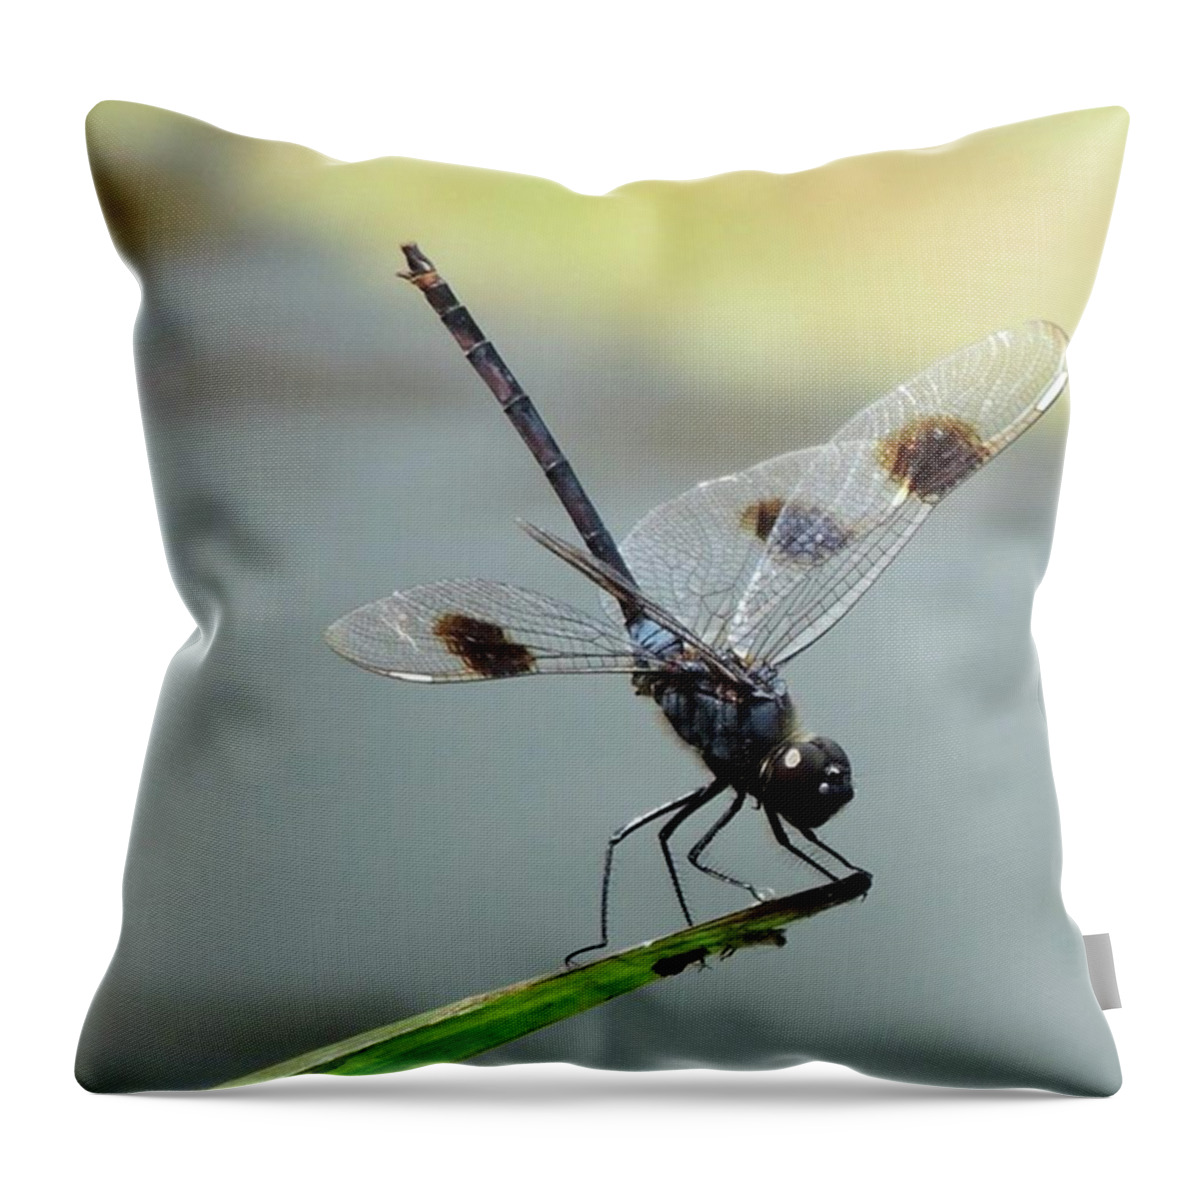 Dragonfly Throw Pillow featuring the photograph Dragonfly by Marvin Reinhart